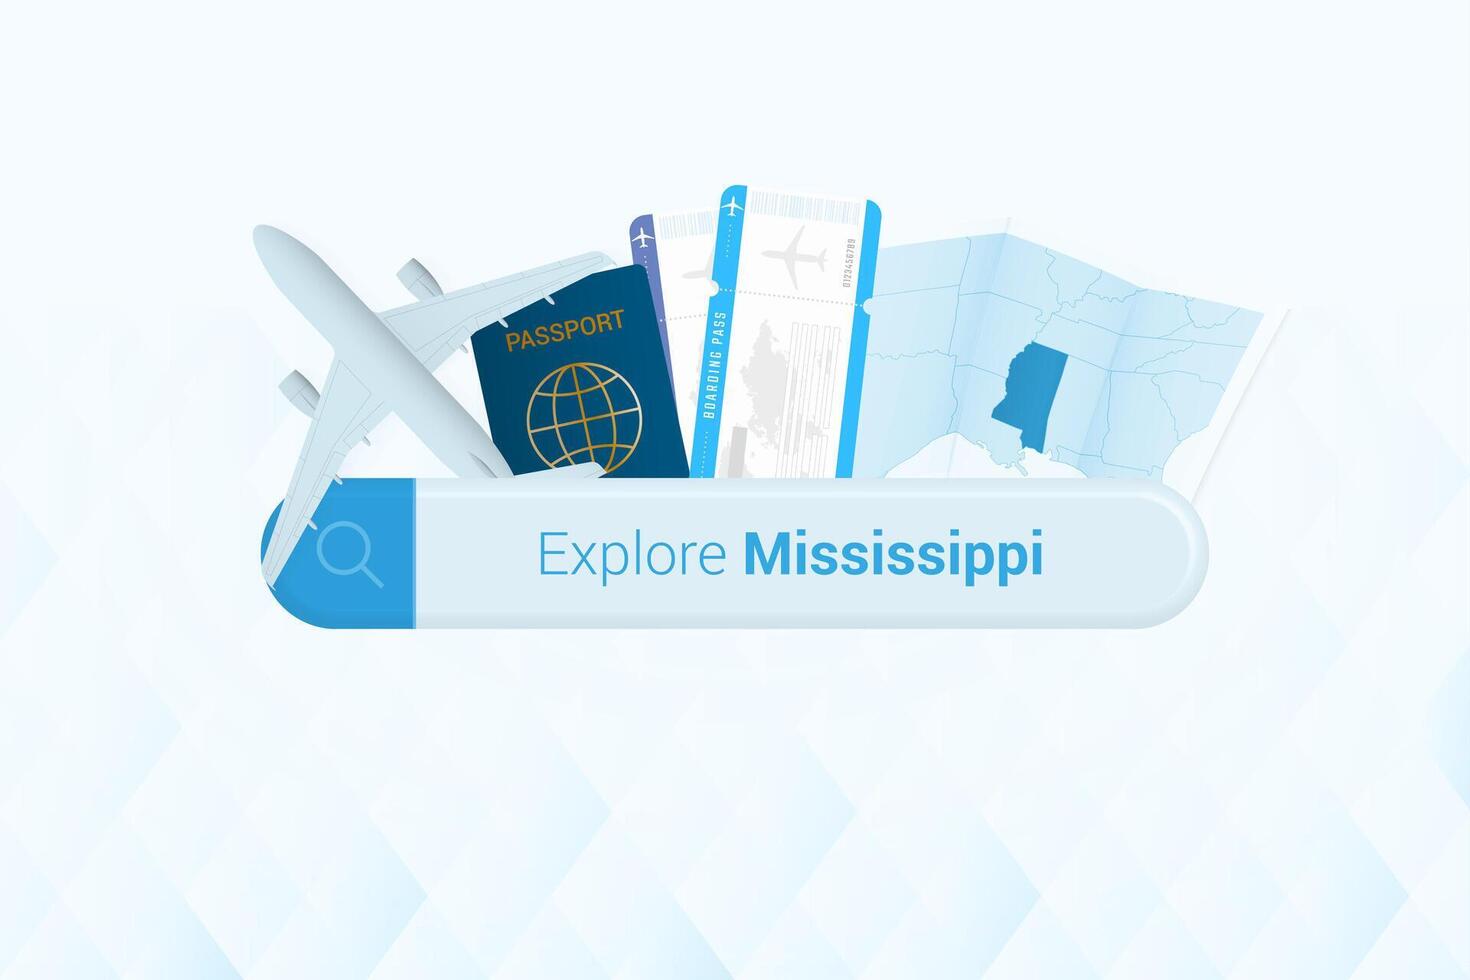 Searching tickets to Mississippi or travel destination in Mississippi. Searching bar with airplane, passport, boarding pass, tickets and map. vector